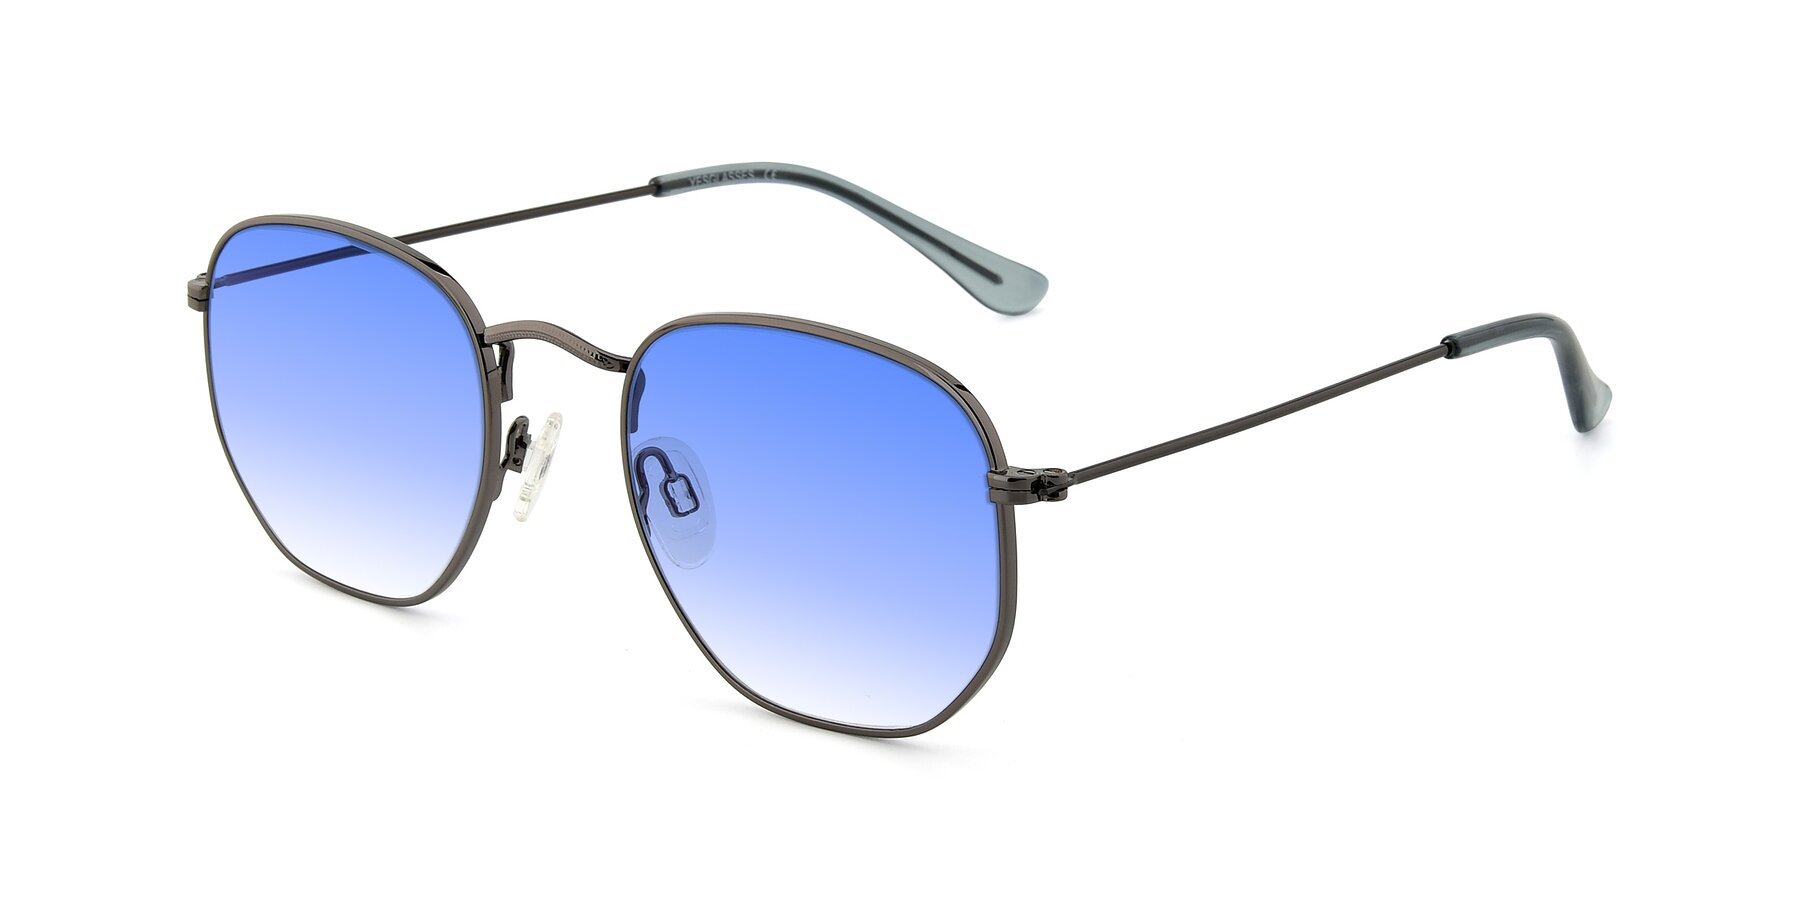 Angle of SSR1943 in Grey with Blue Gradient Lenses